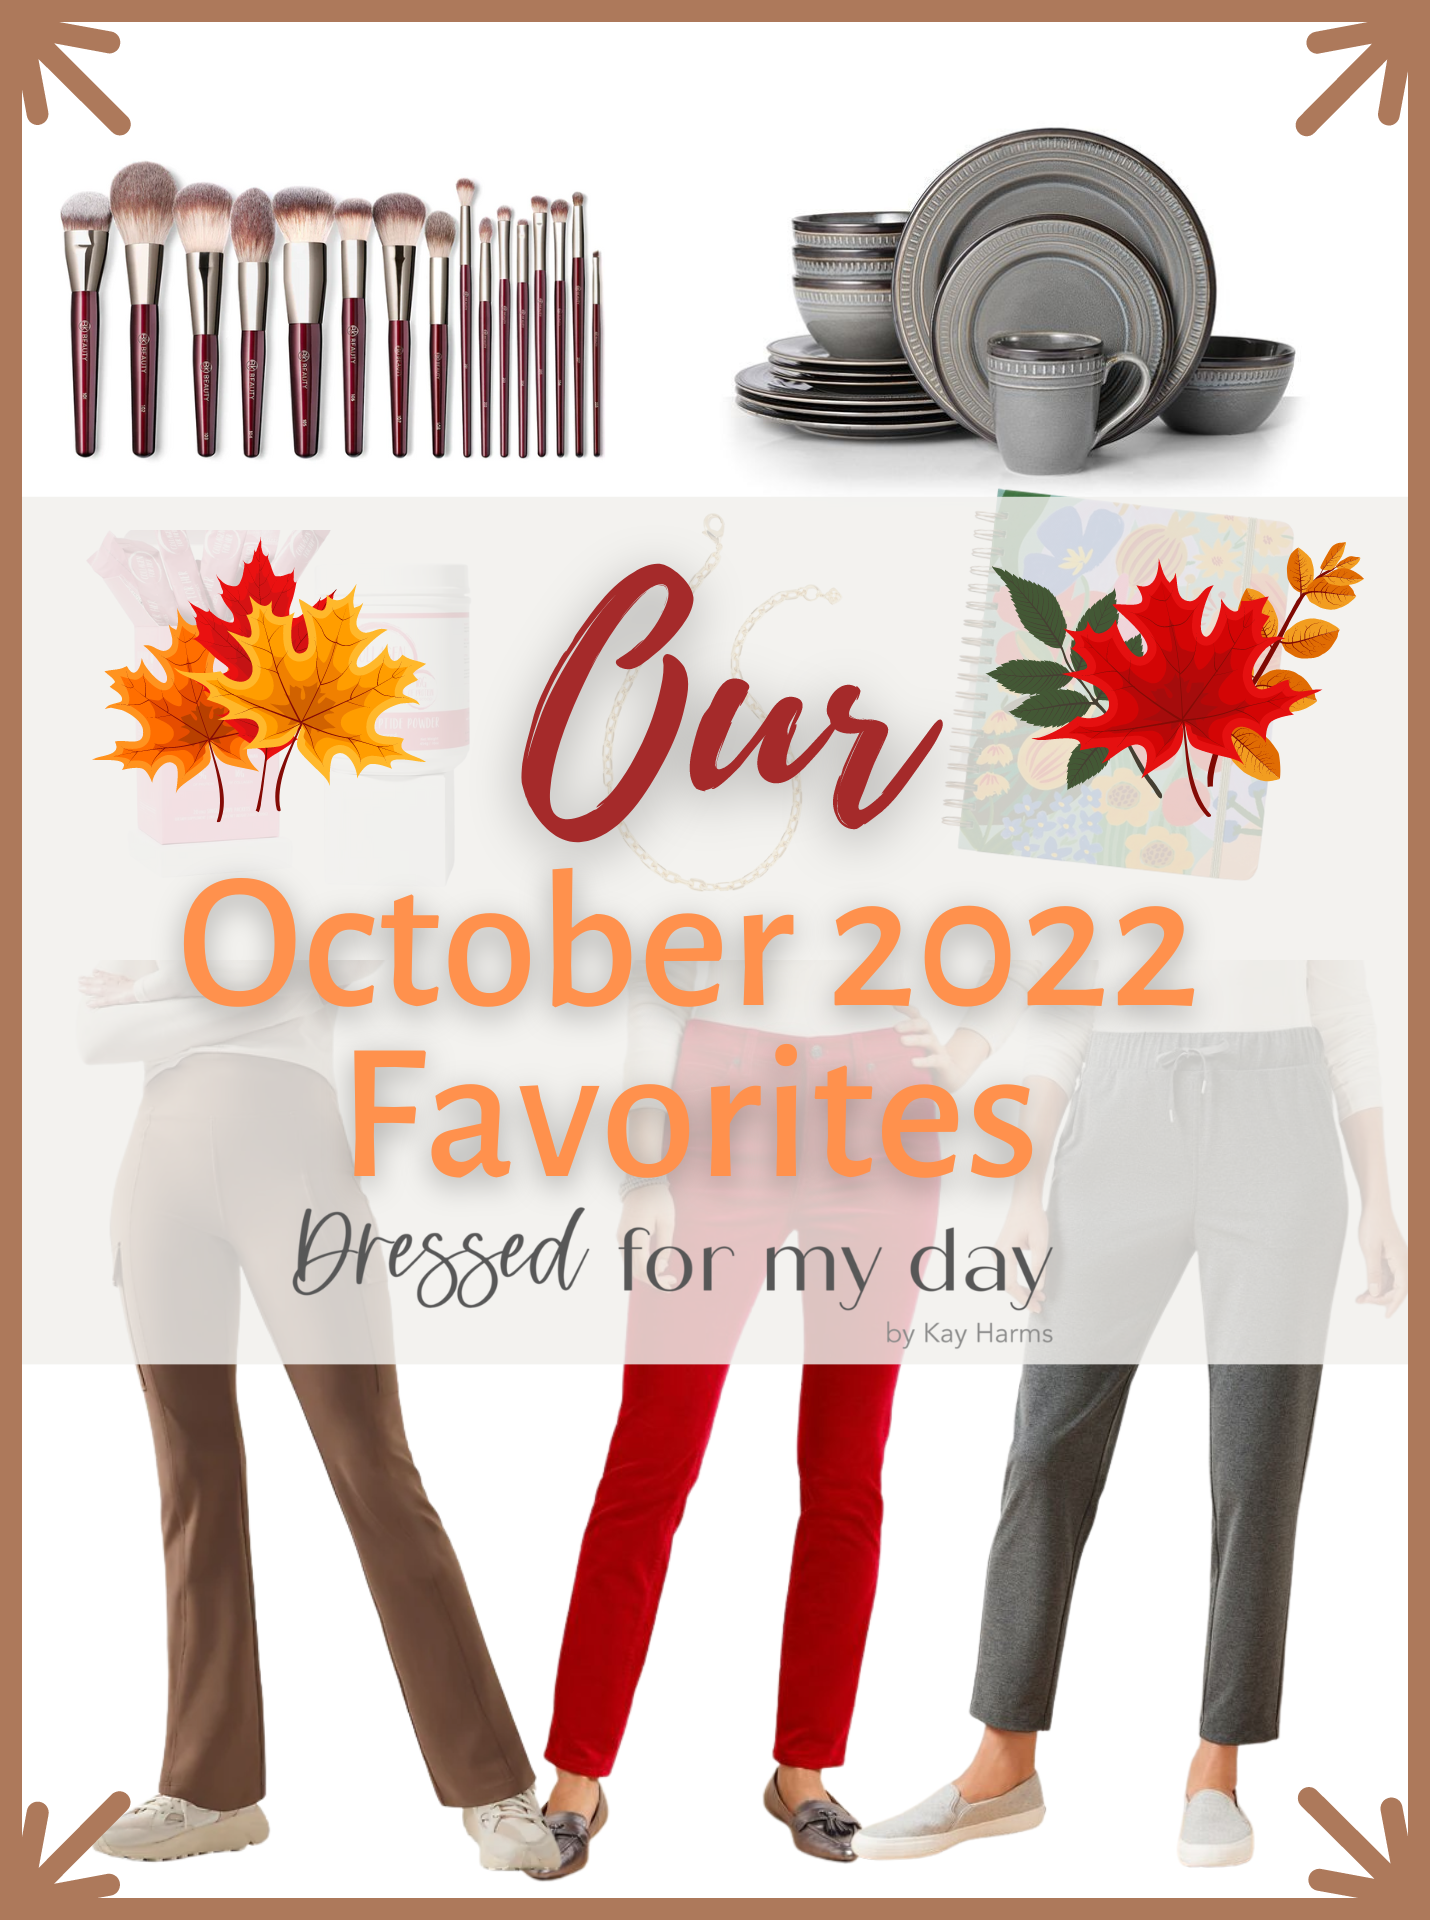 Our October 2022 Favorites Cover